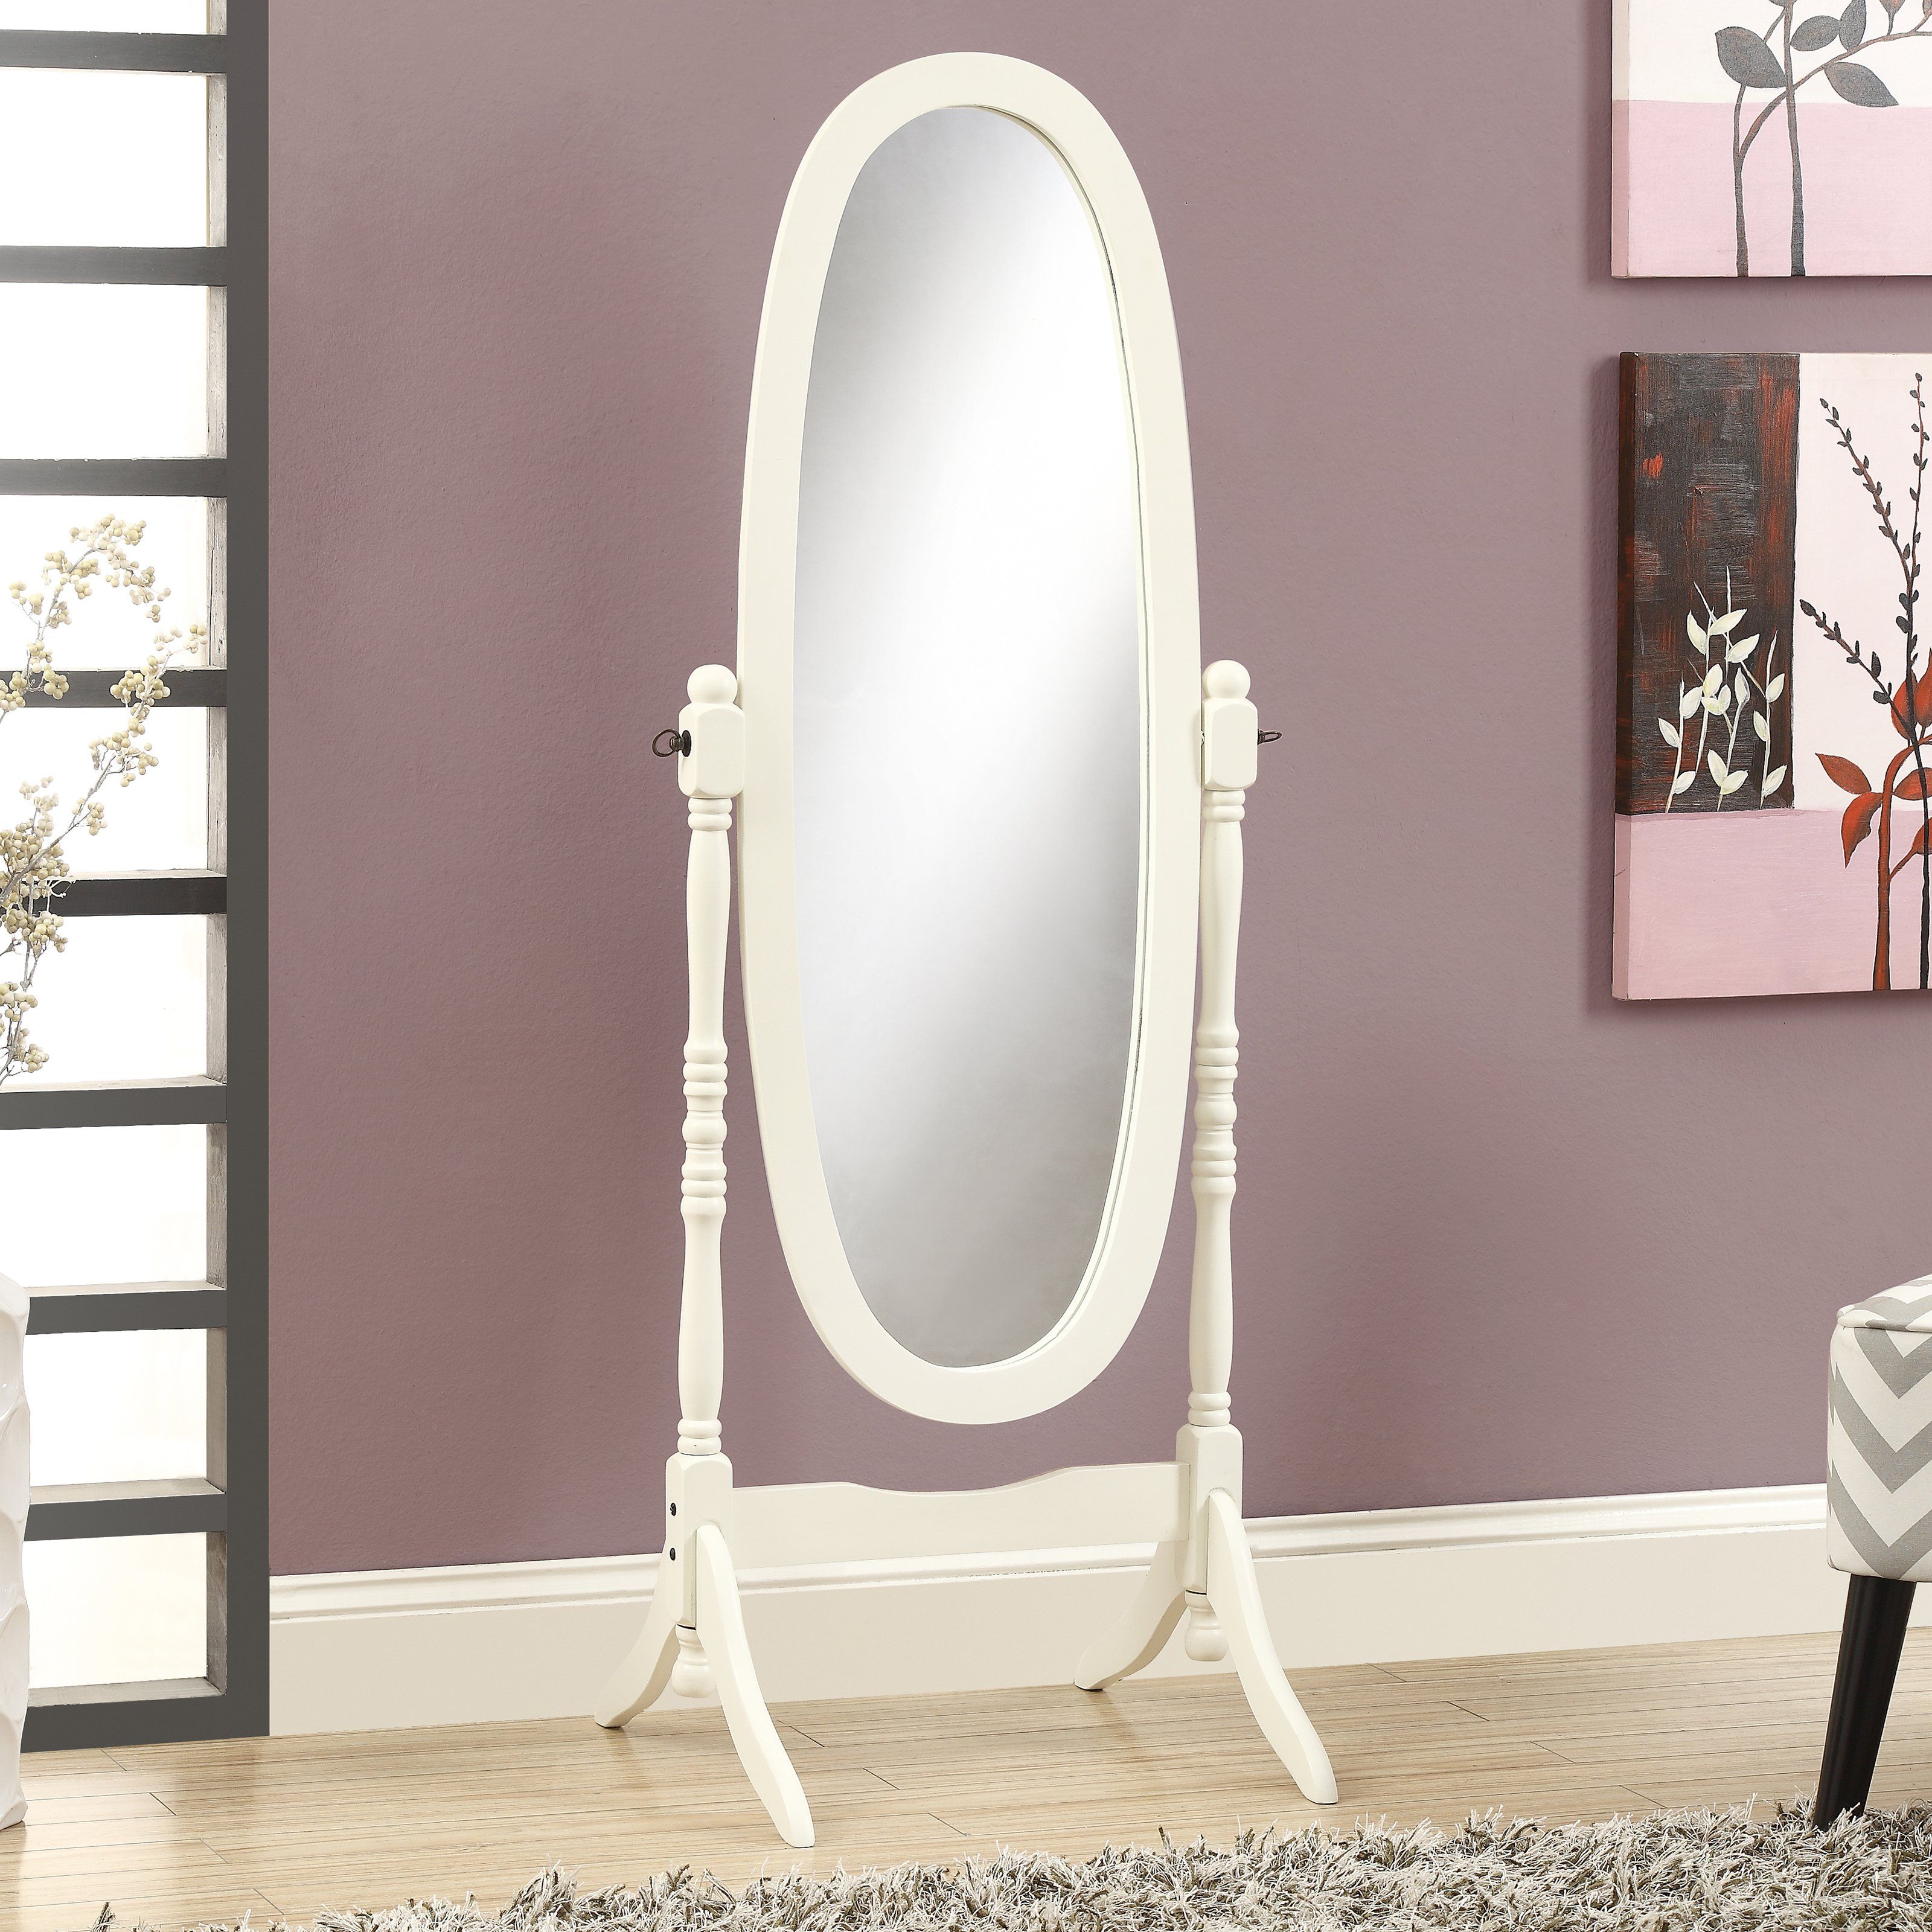 Current Ausergewohnlich White Vintage Full Length Wall Mirror Set Round With Oval Full Length Wall Mirrors (View 11 of 20)